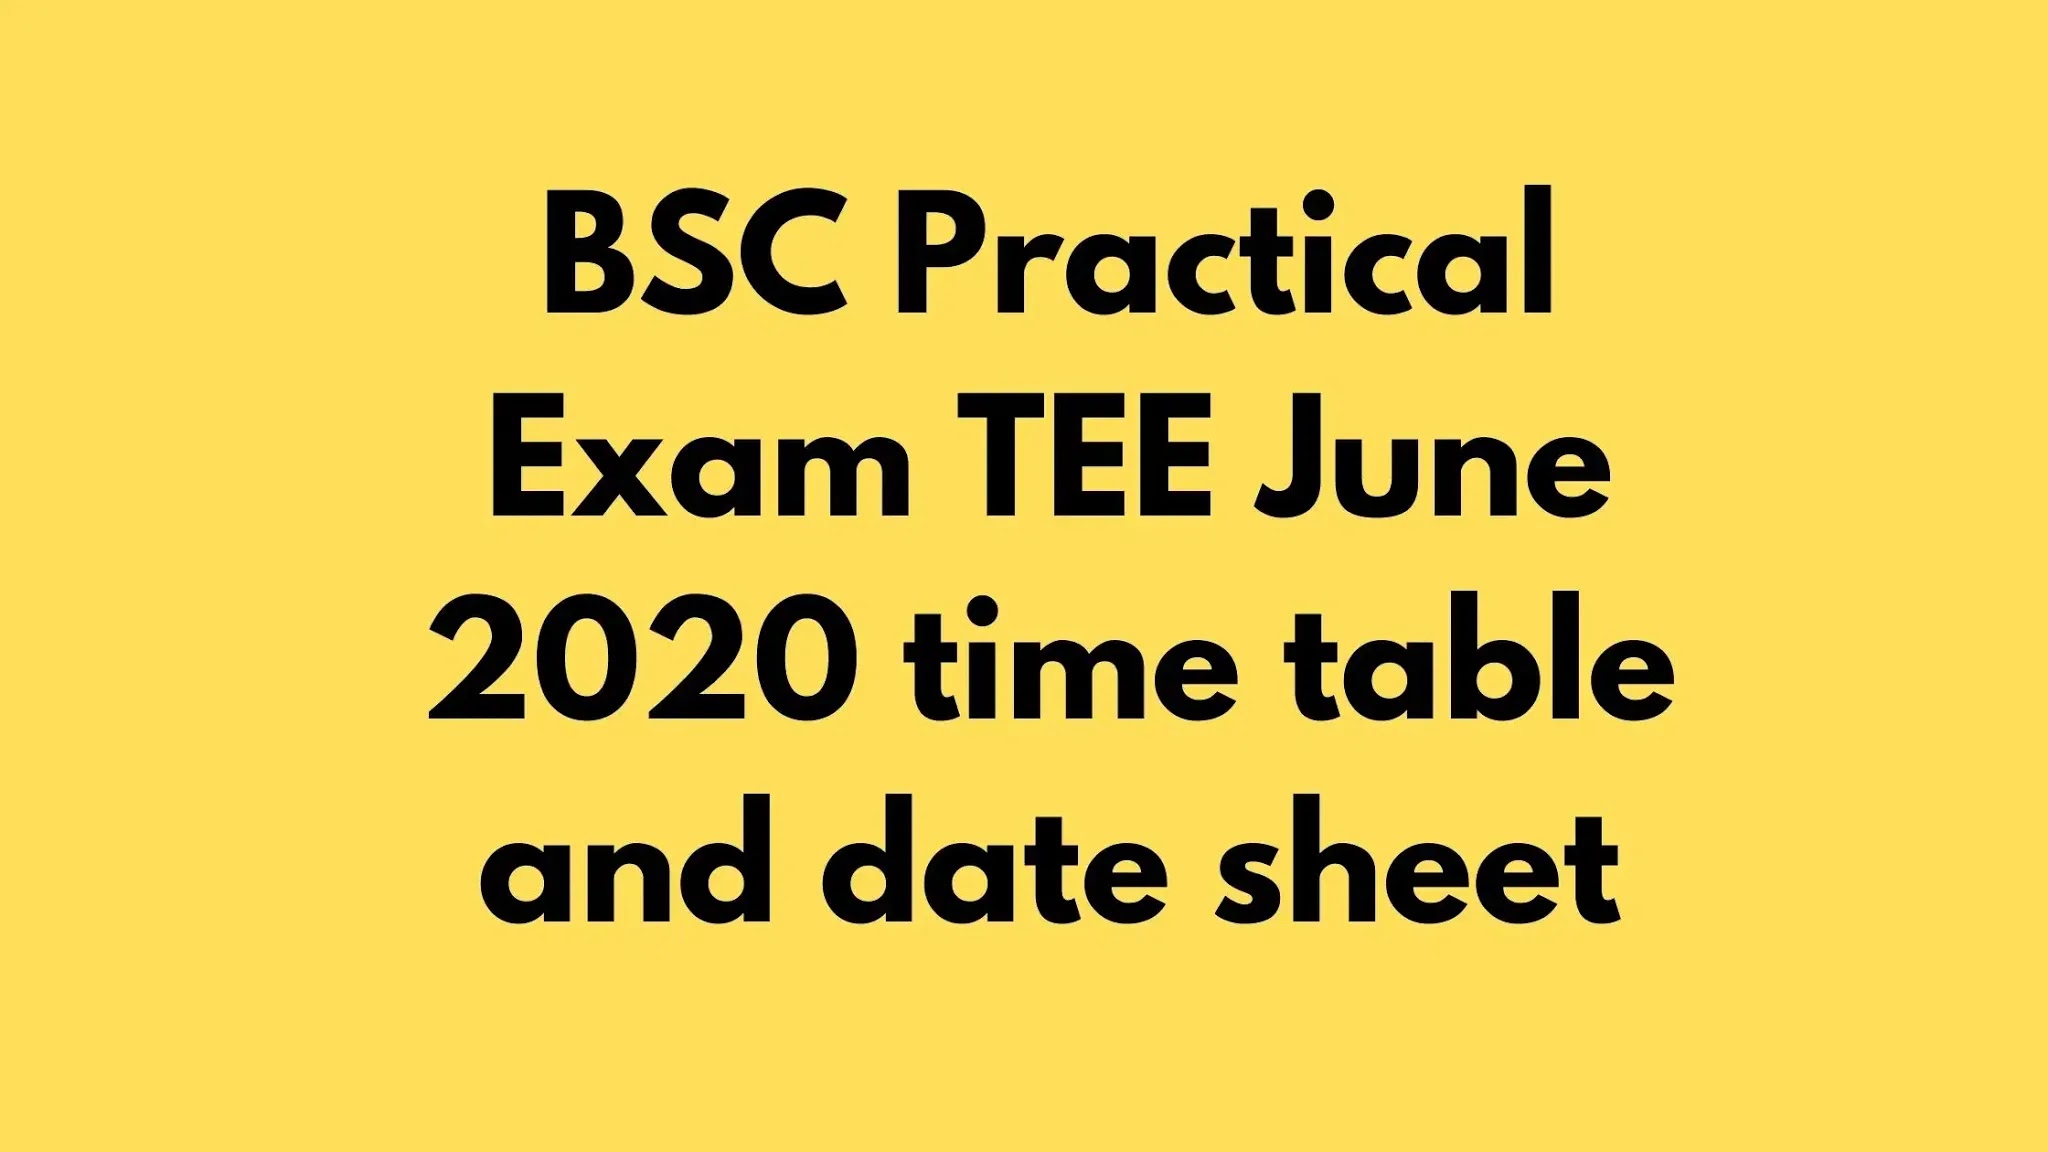 BSC Practical Exam TEE June 2020 time table and date sheet